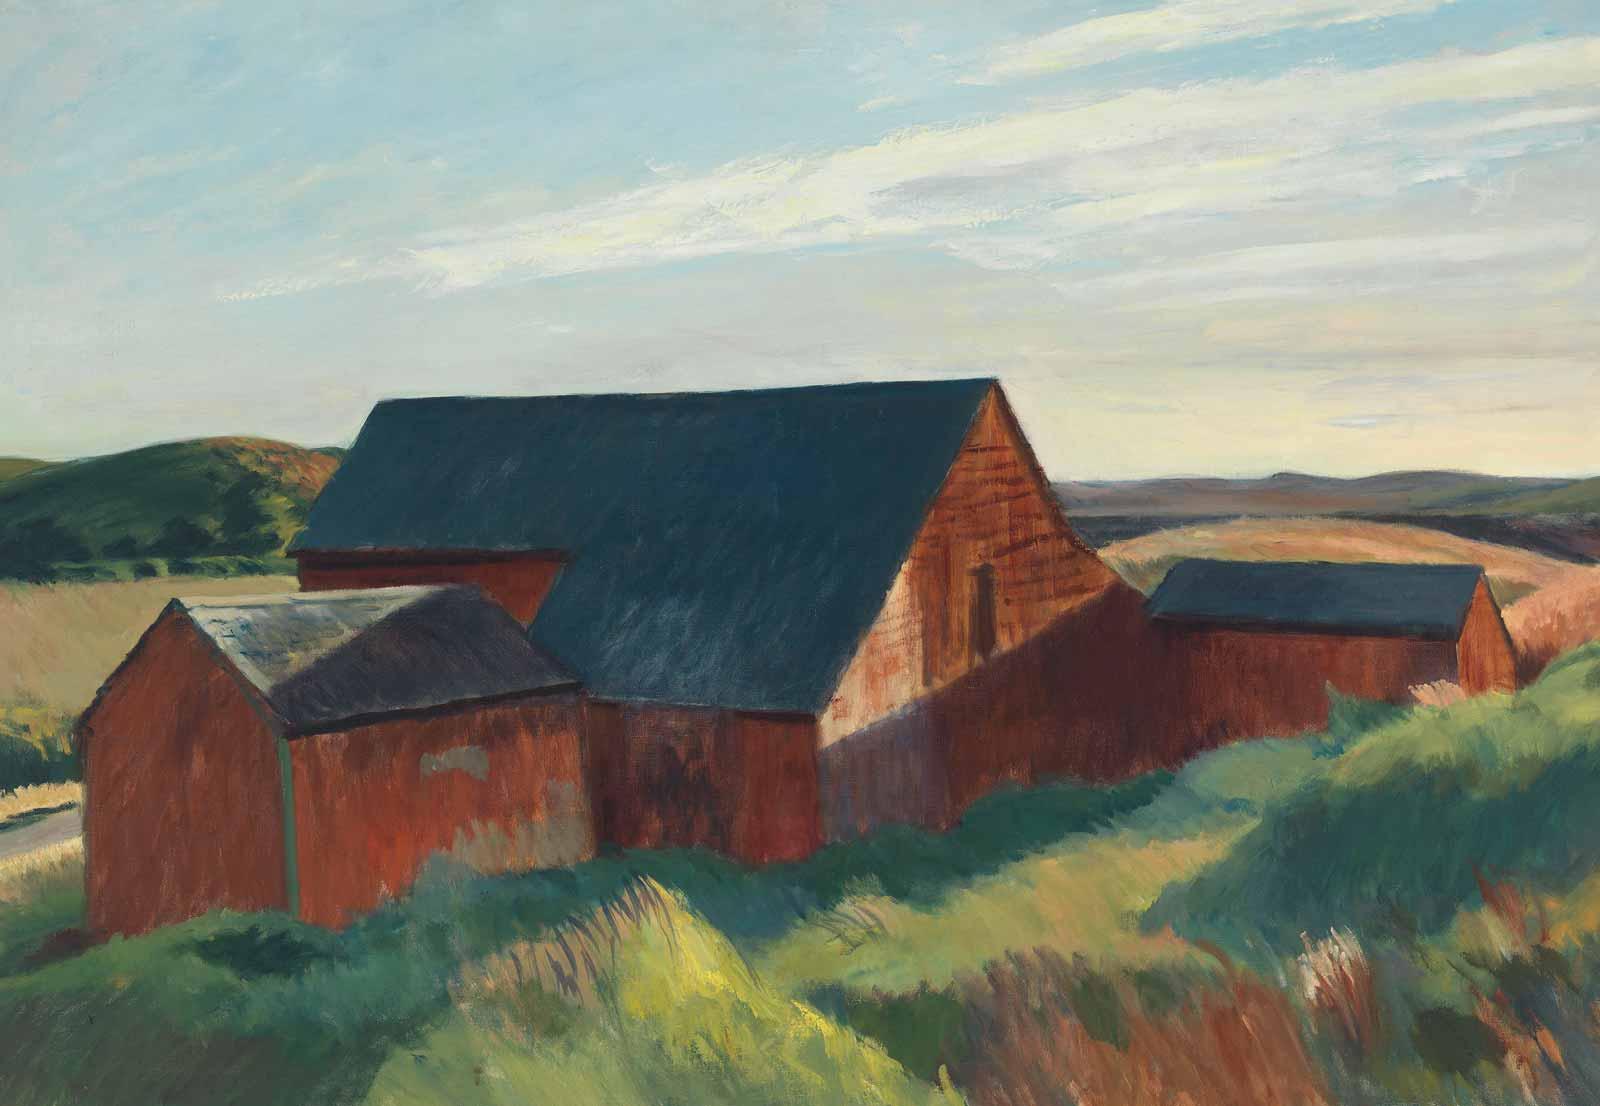 Edward Hopper's Intimate Paintings of the American Landscape